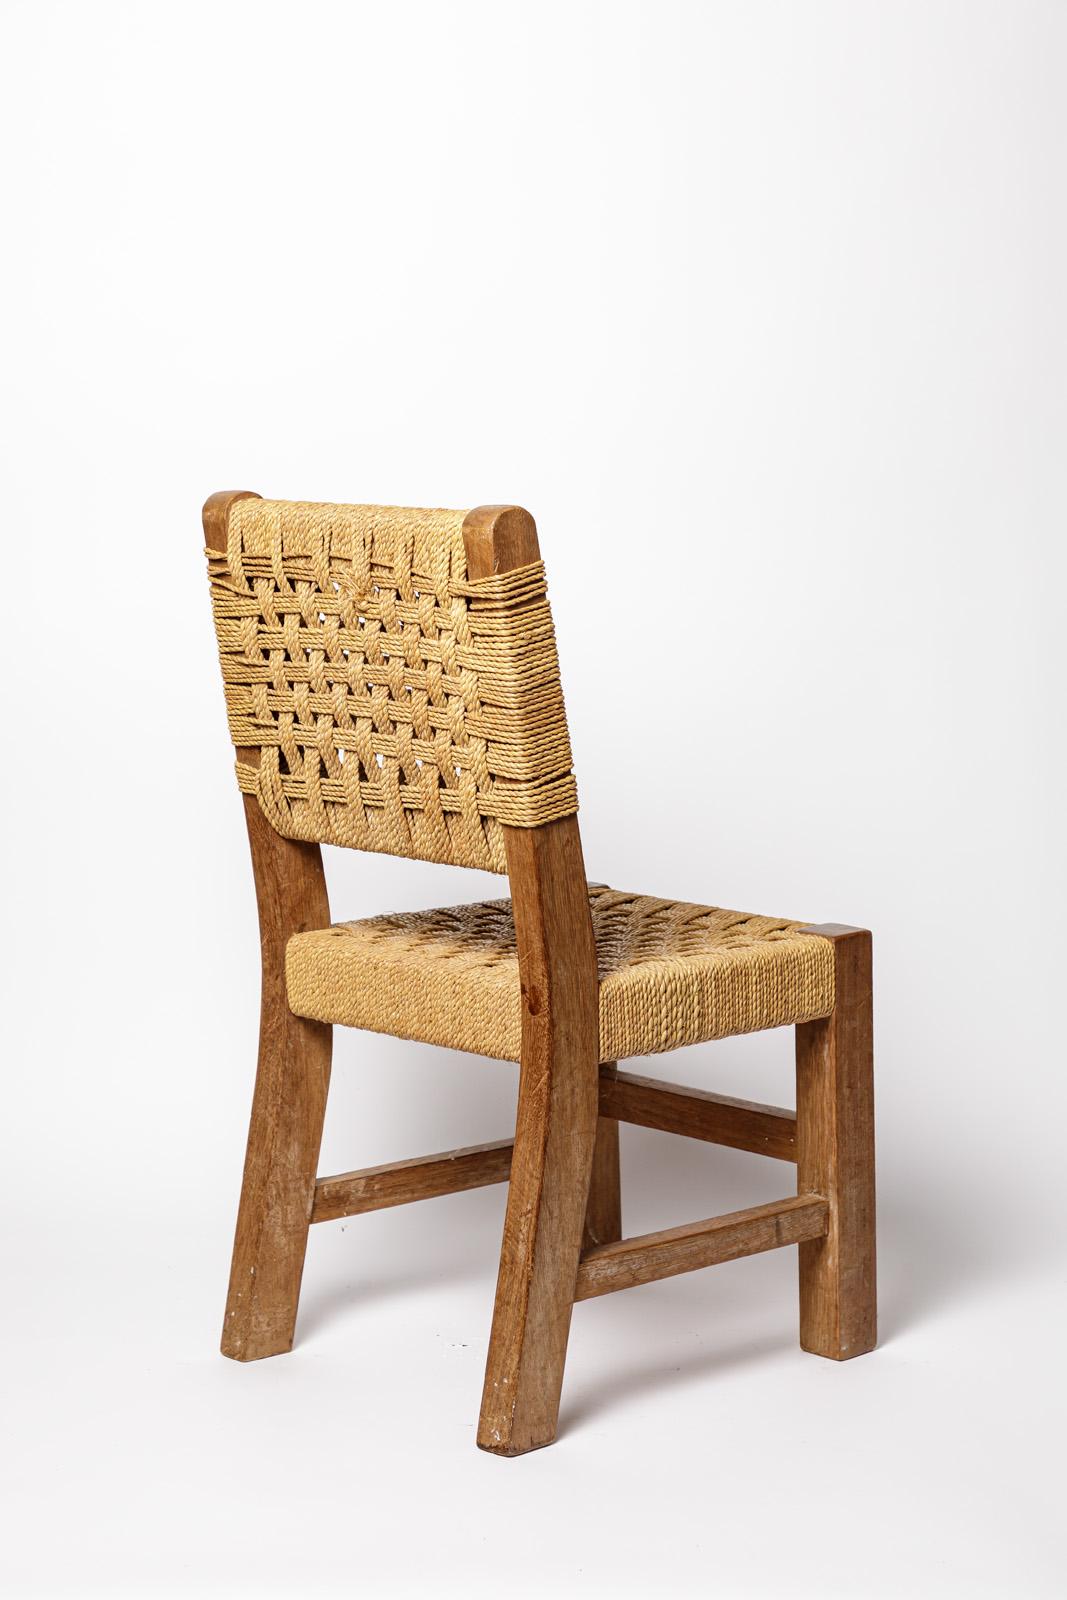 20th century children wood and cord design chair style of AUdoux Minnet design In Good Condition For Sale In Neuilly-en- sancerre, FR